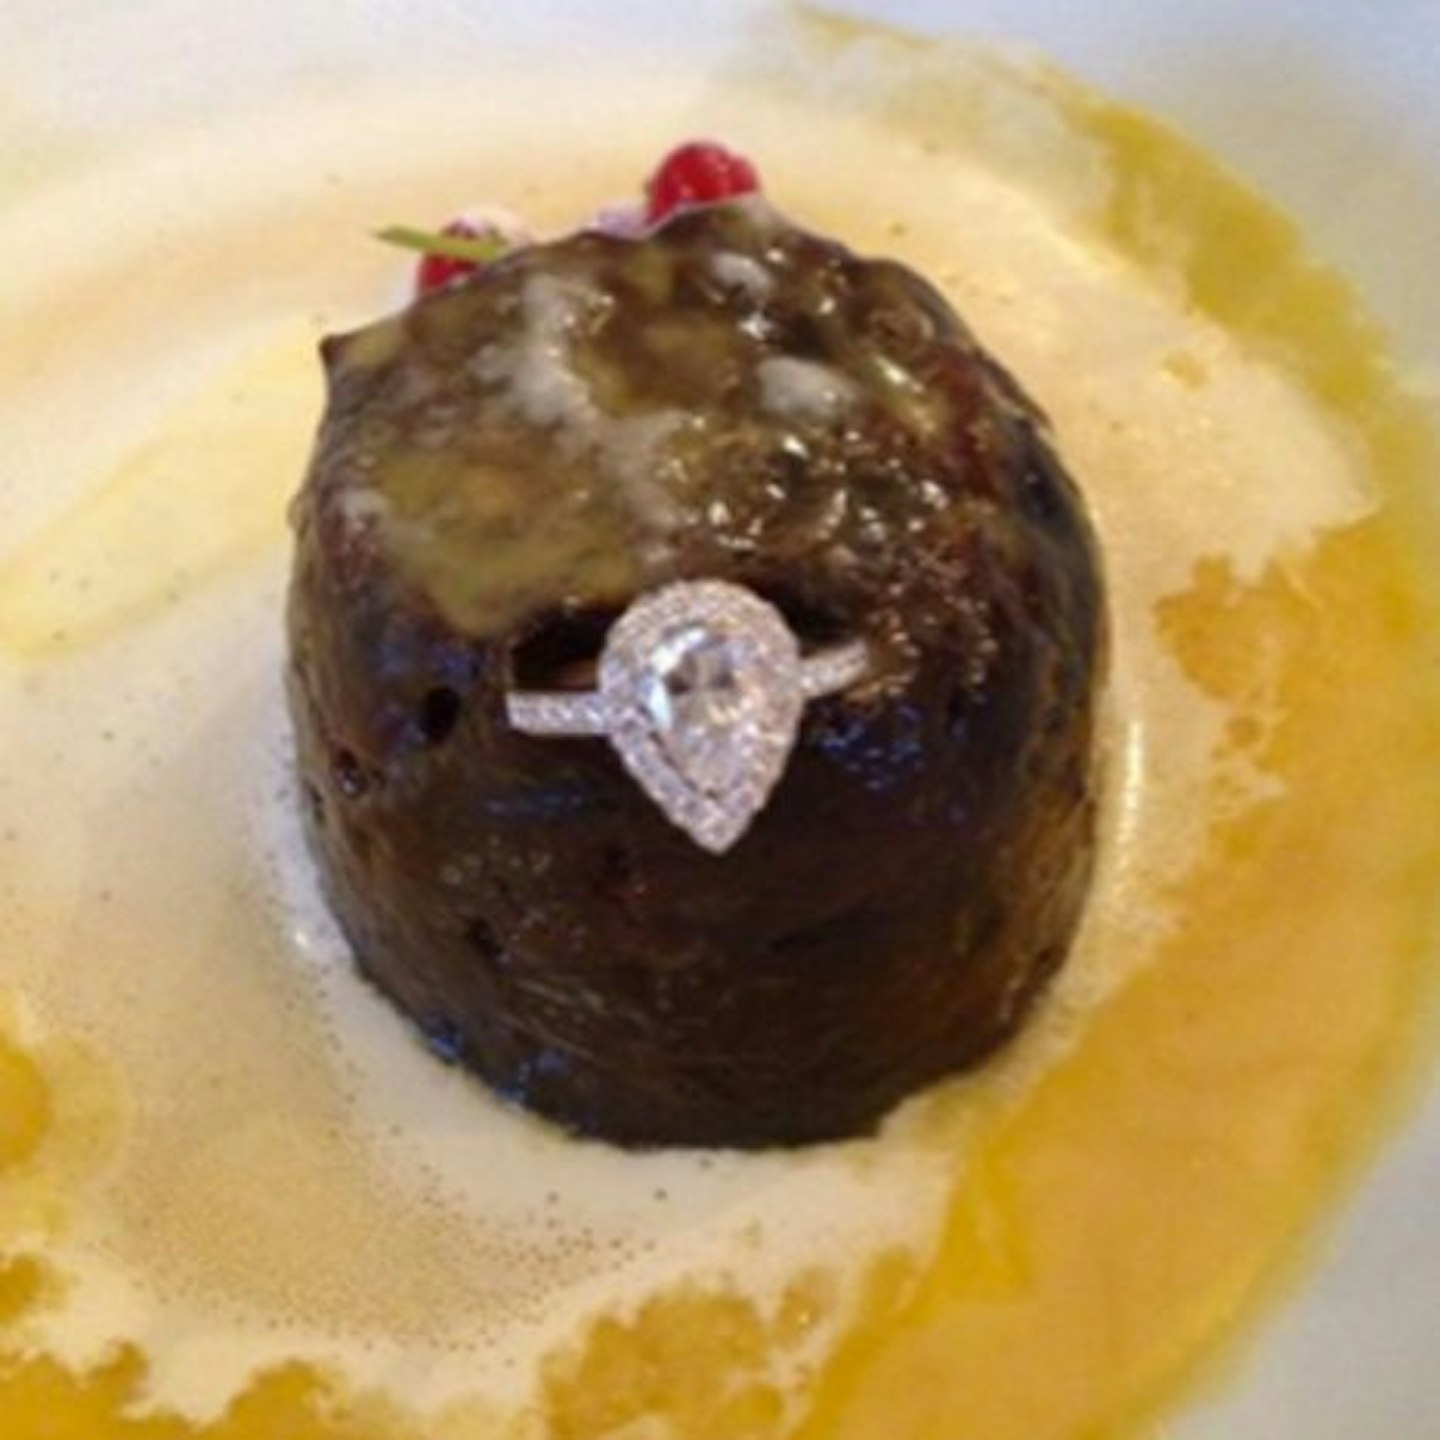 Rami proposed by sticking the beautiful ring into Gemma's Christmas pud